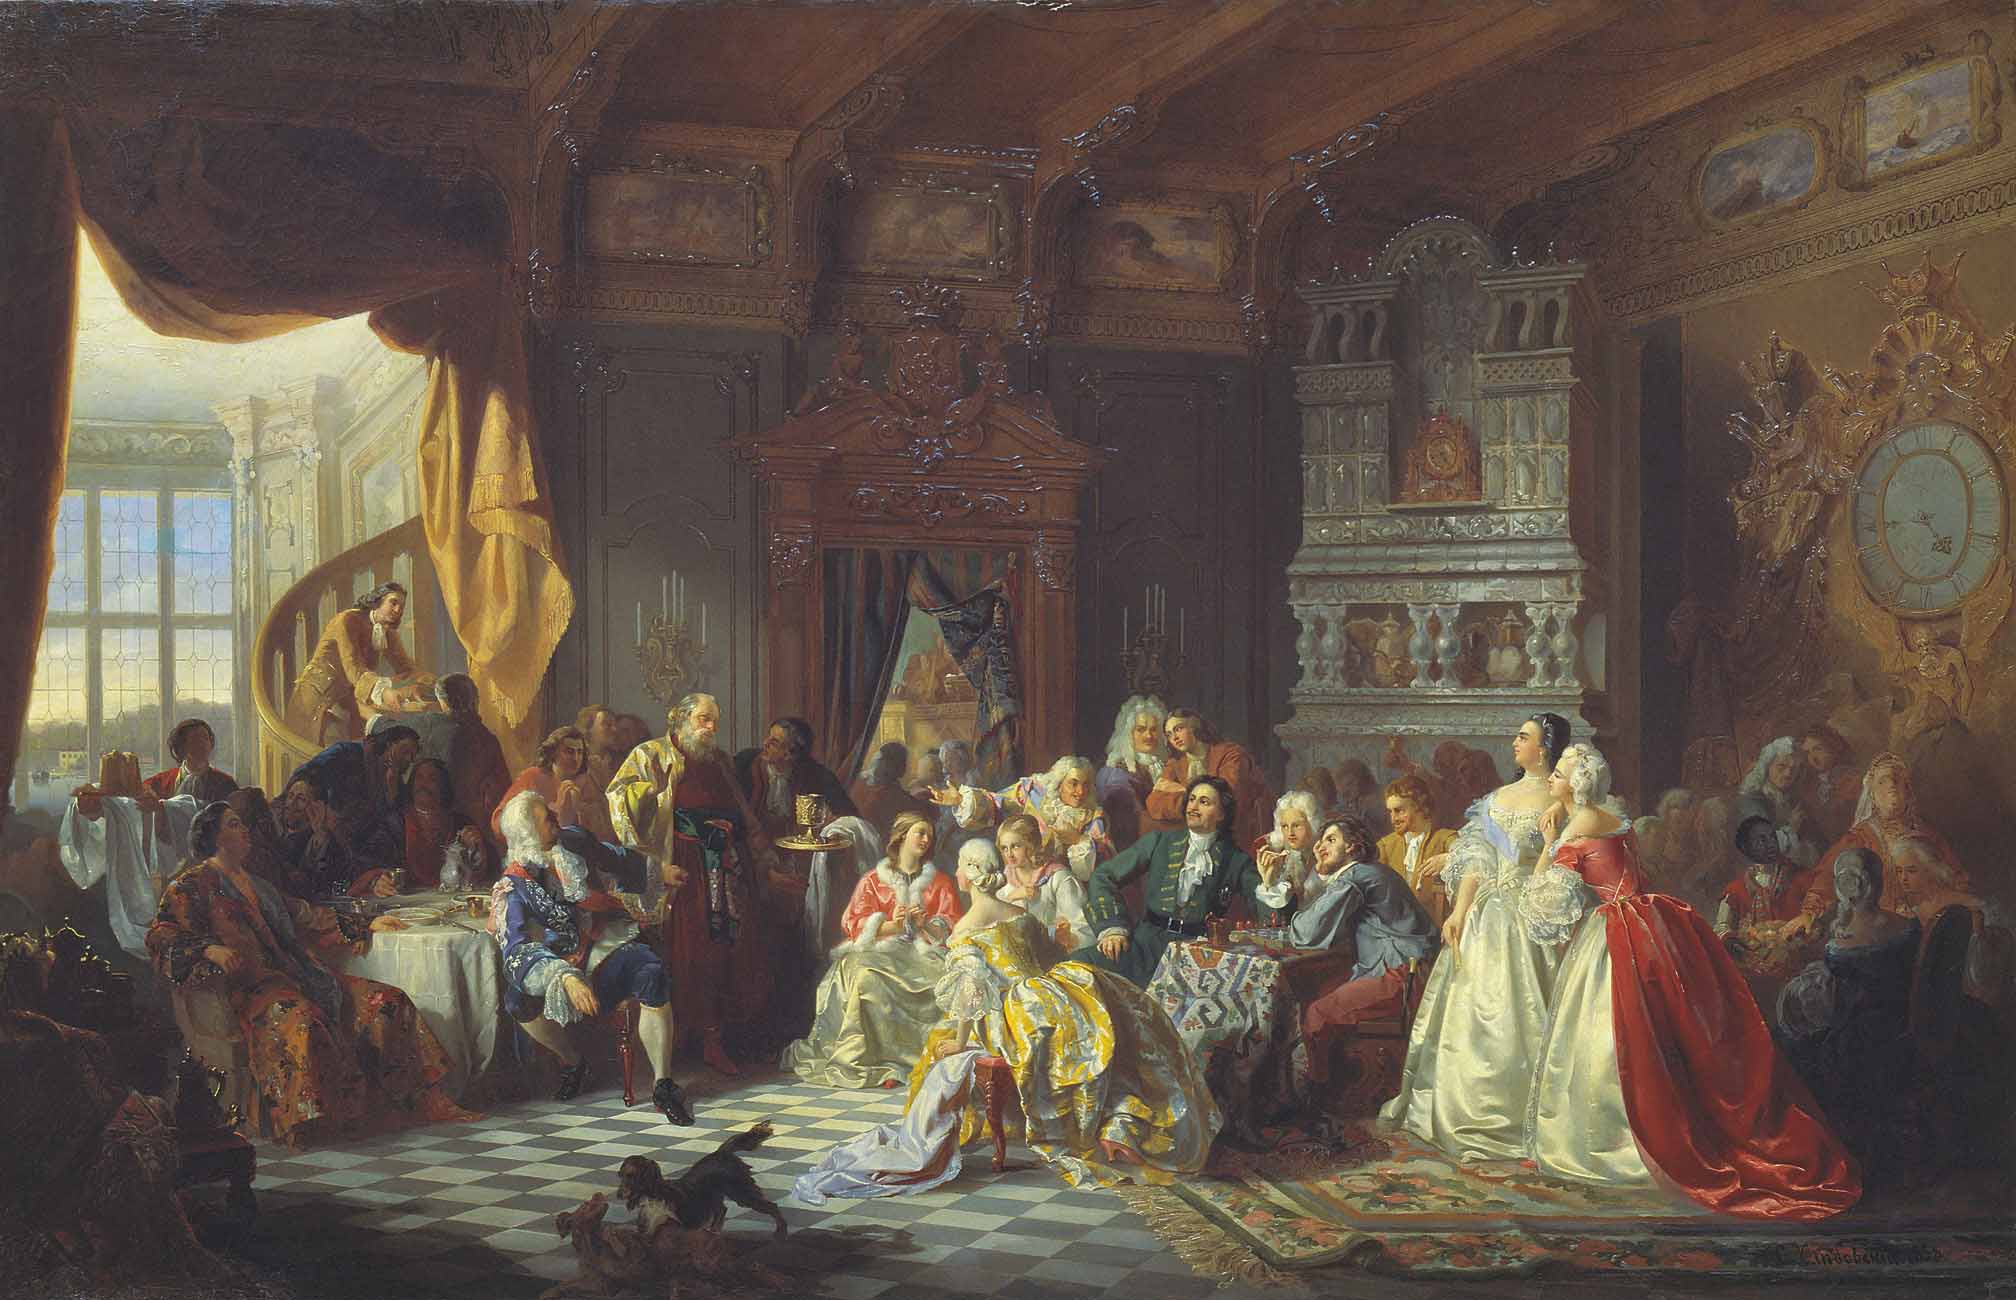 Tsar Peter I and his court